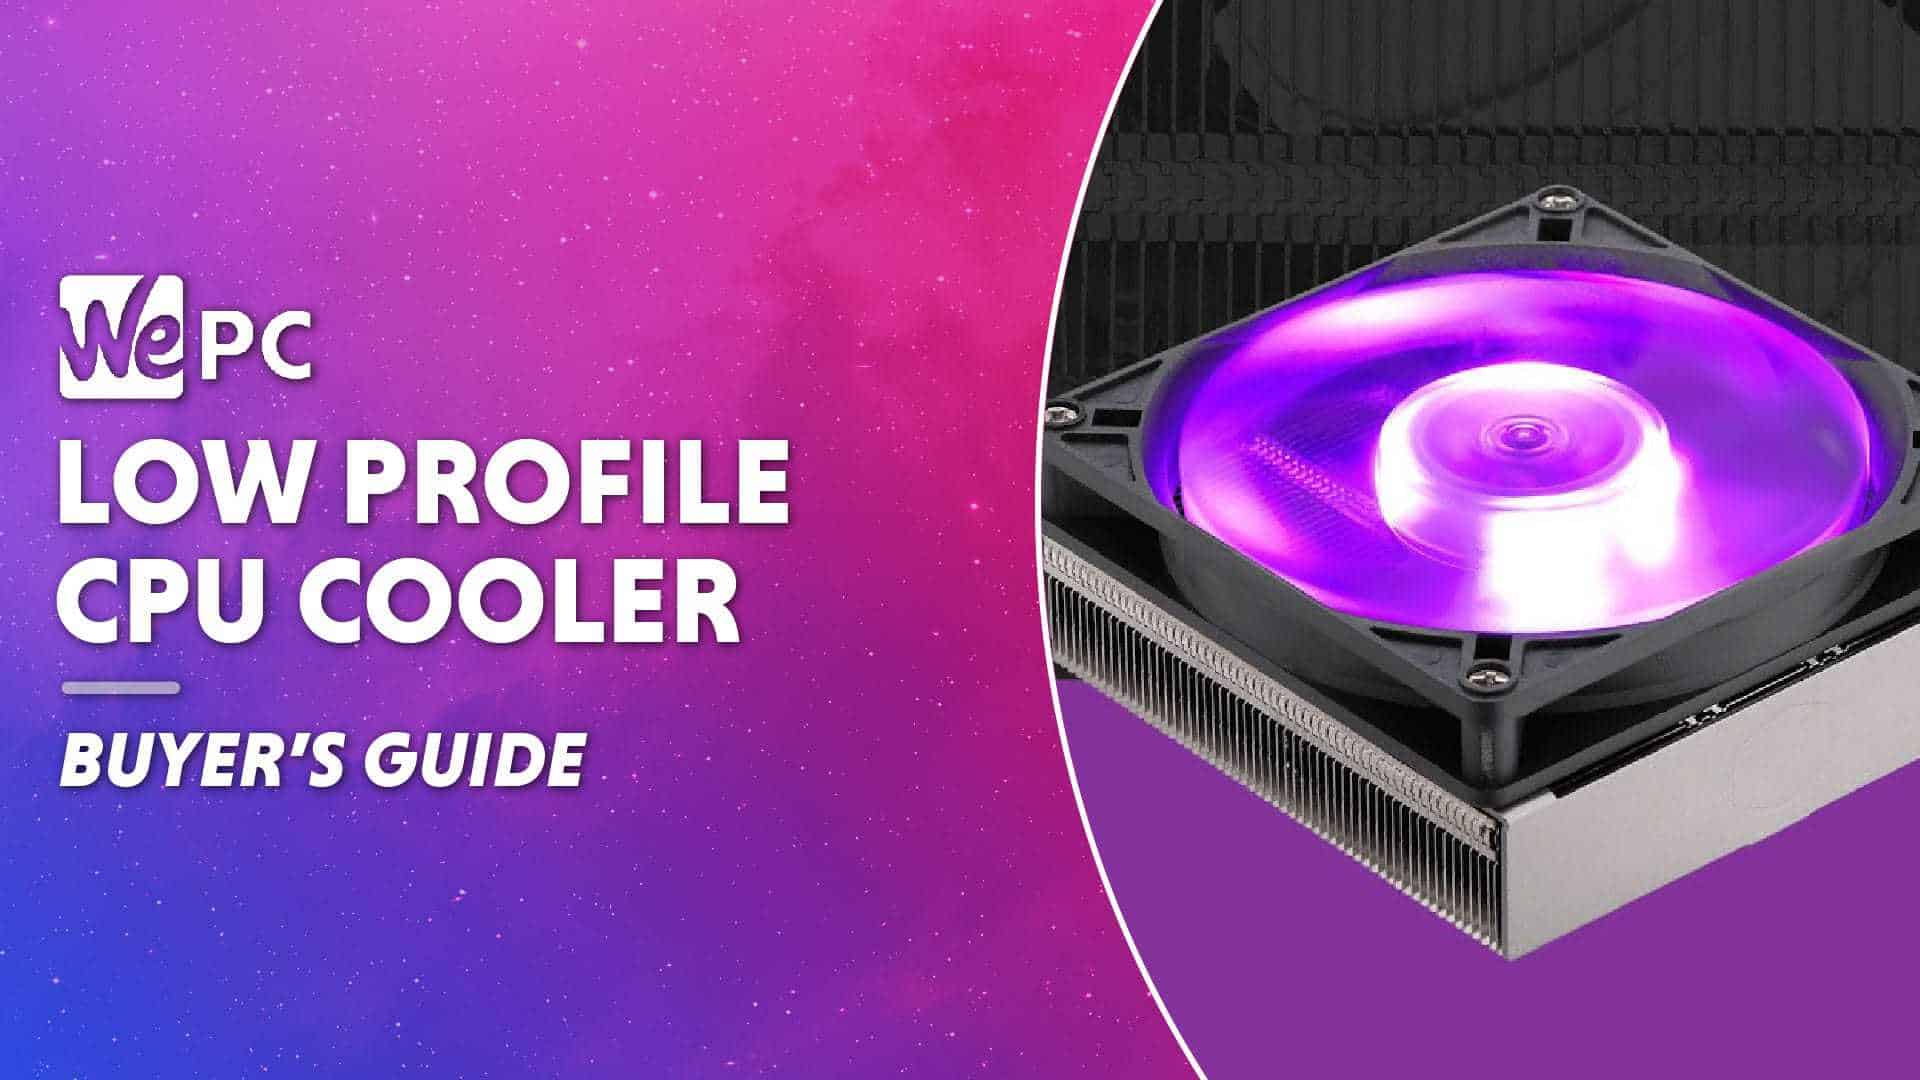 WEPC best low profile CPU cooler Featured image 01